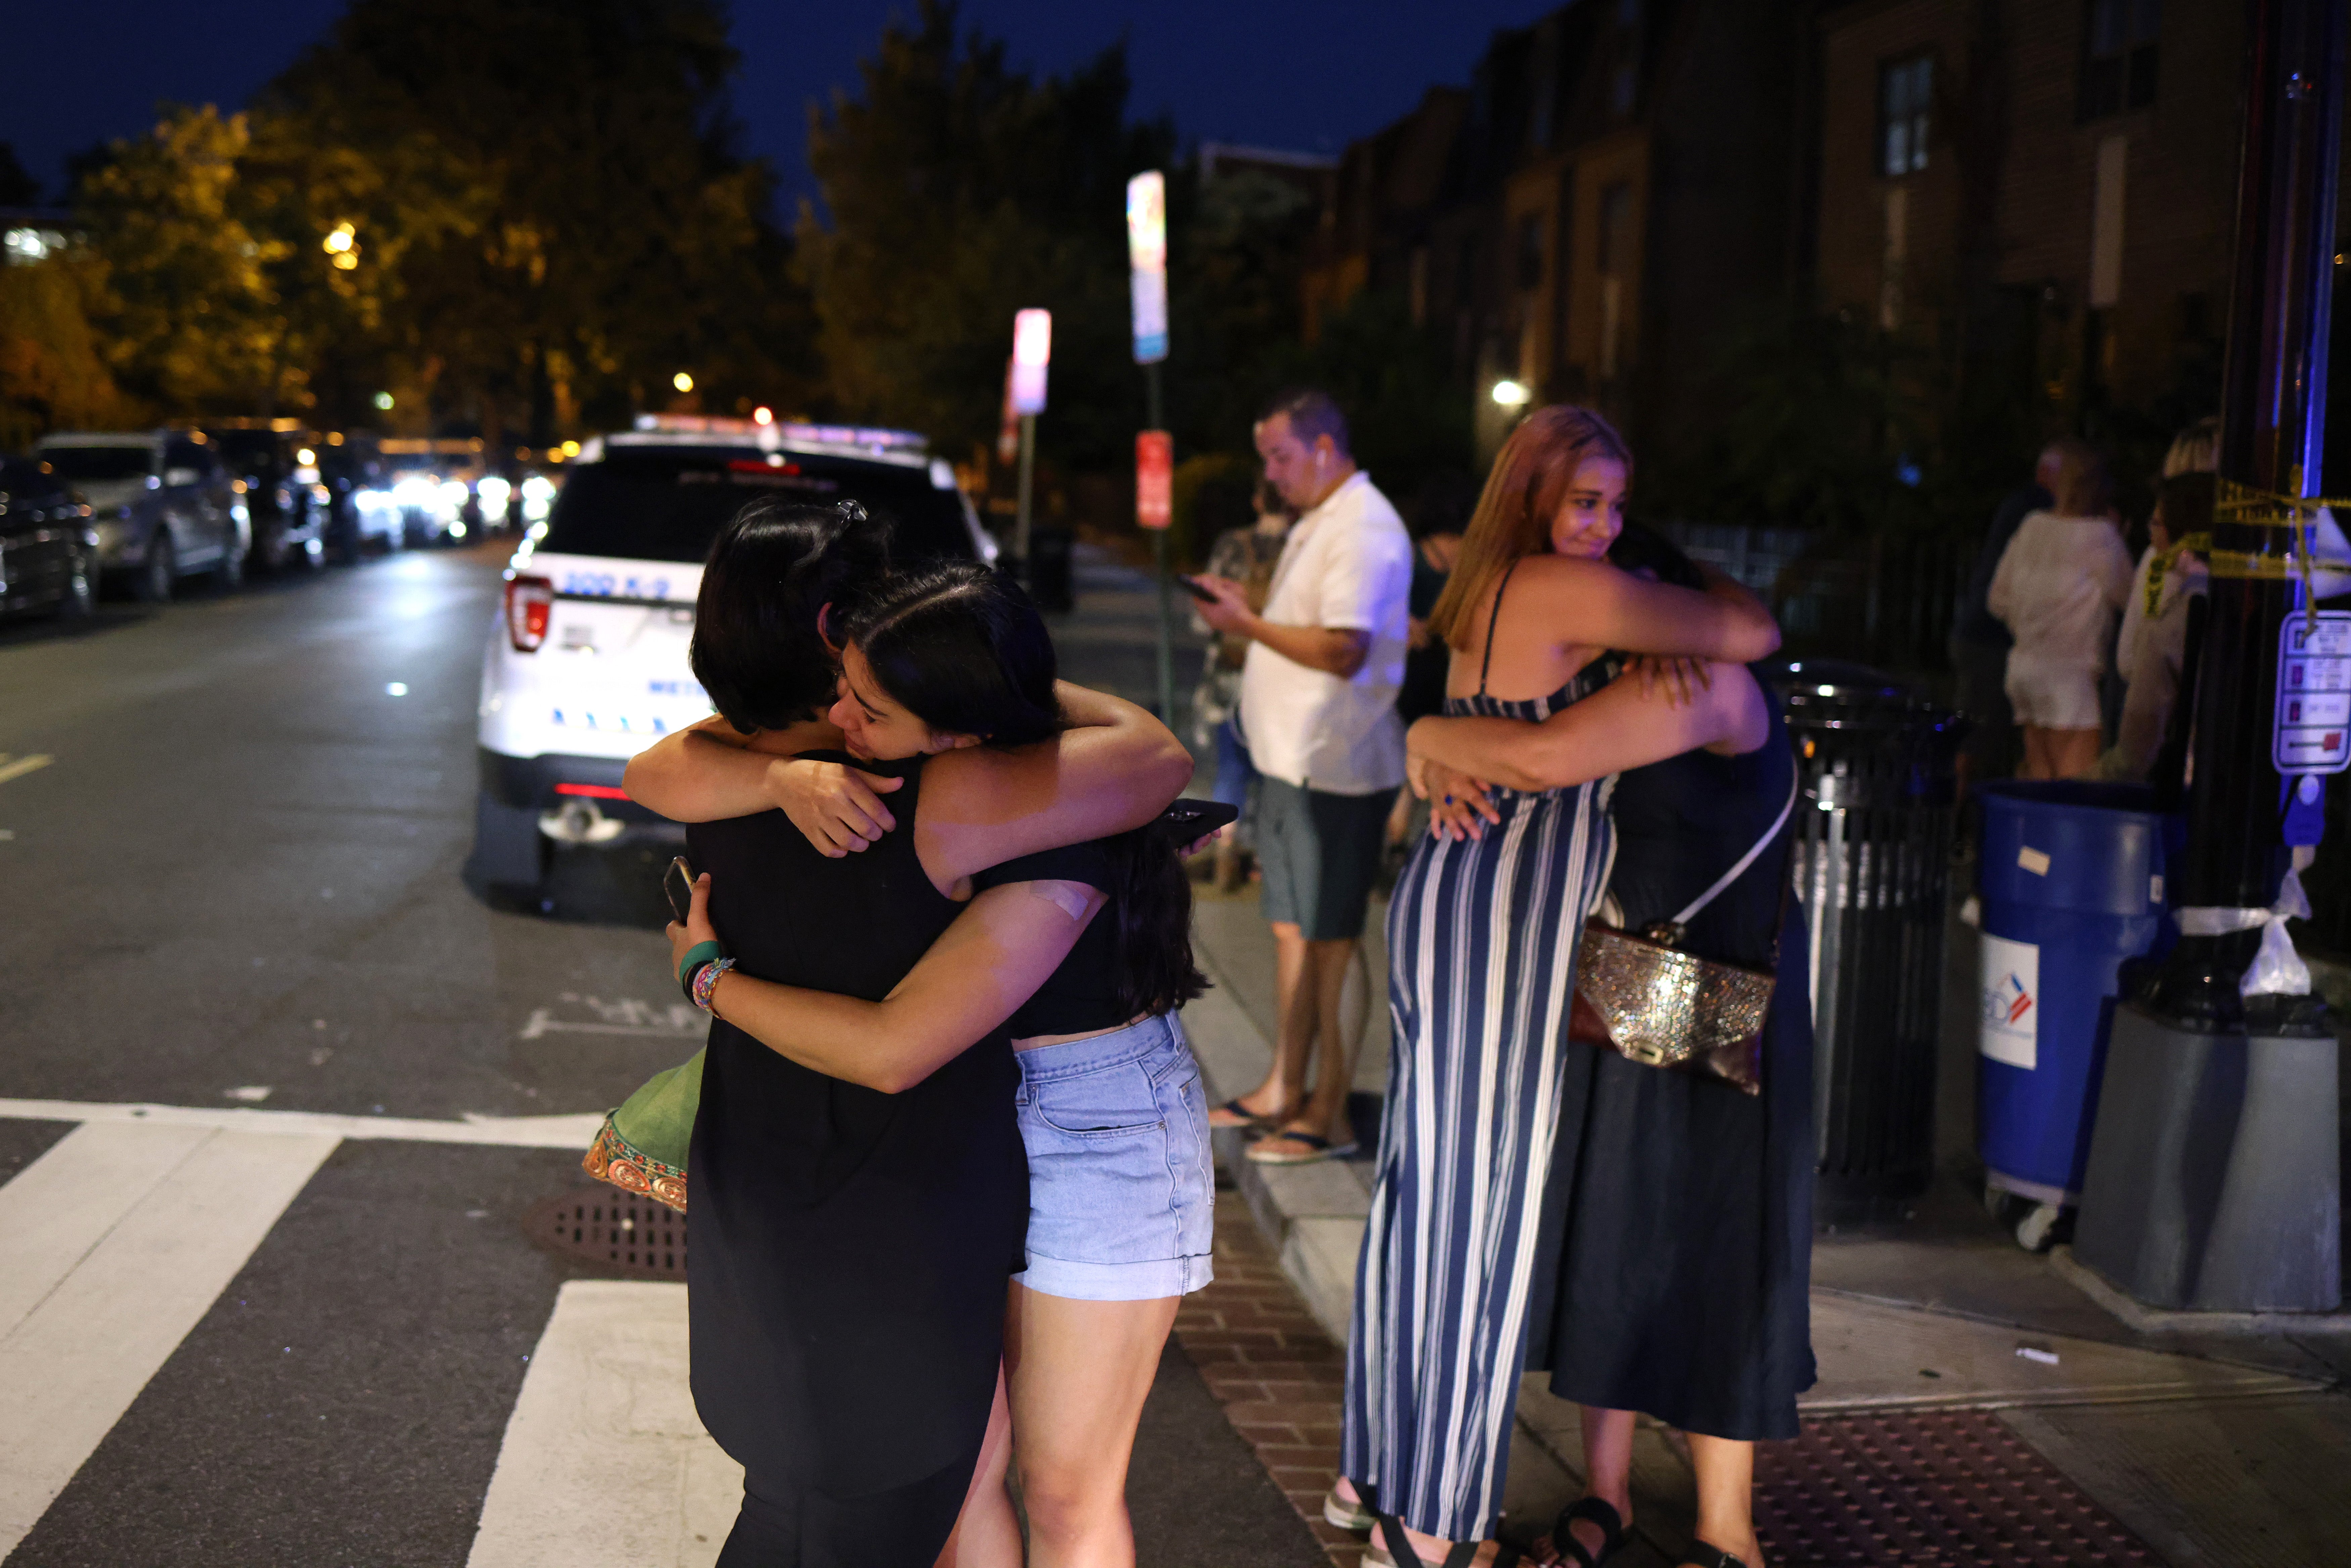 People embrace near the site of a shooting on July 22, 2021 in Washington, DC